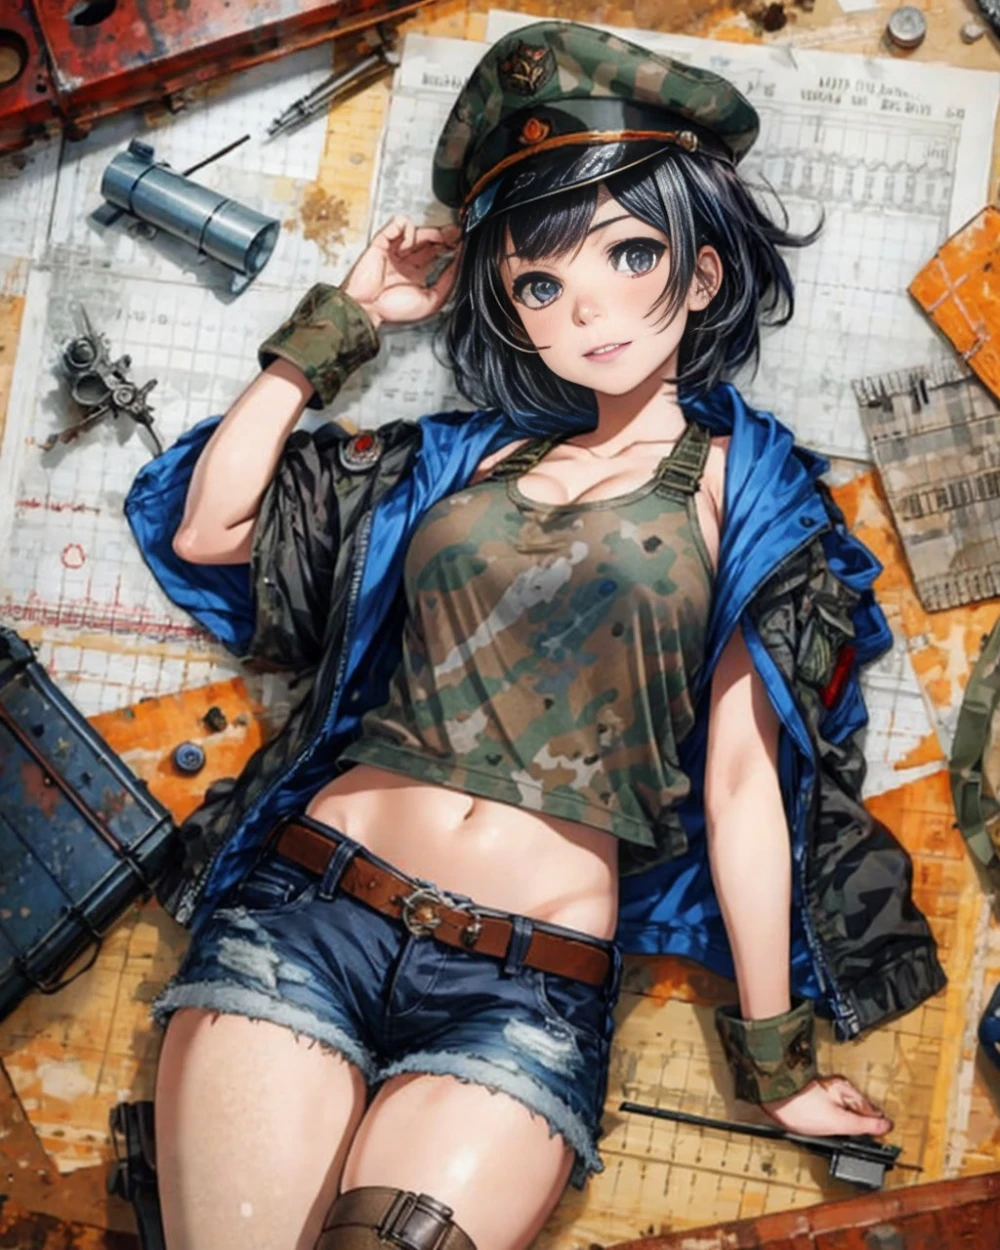 military-uniform-anime-style-all-ages-38